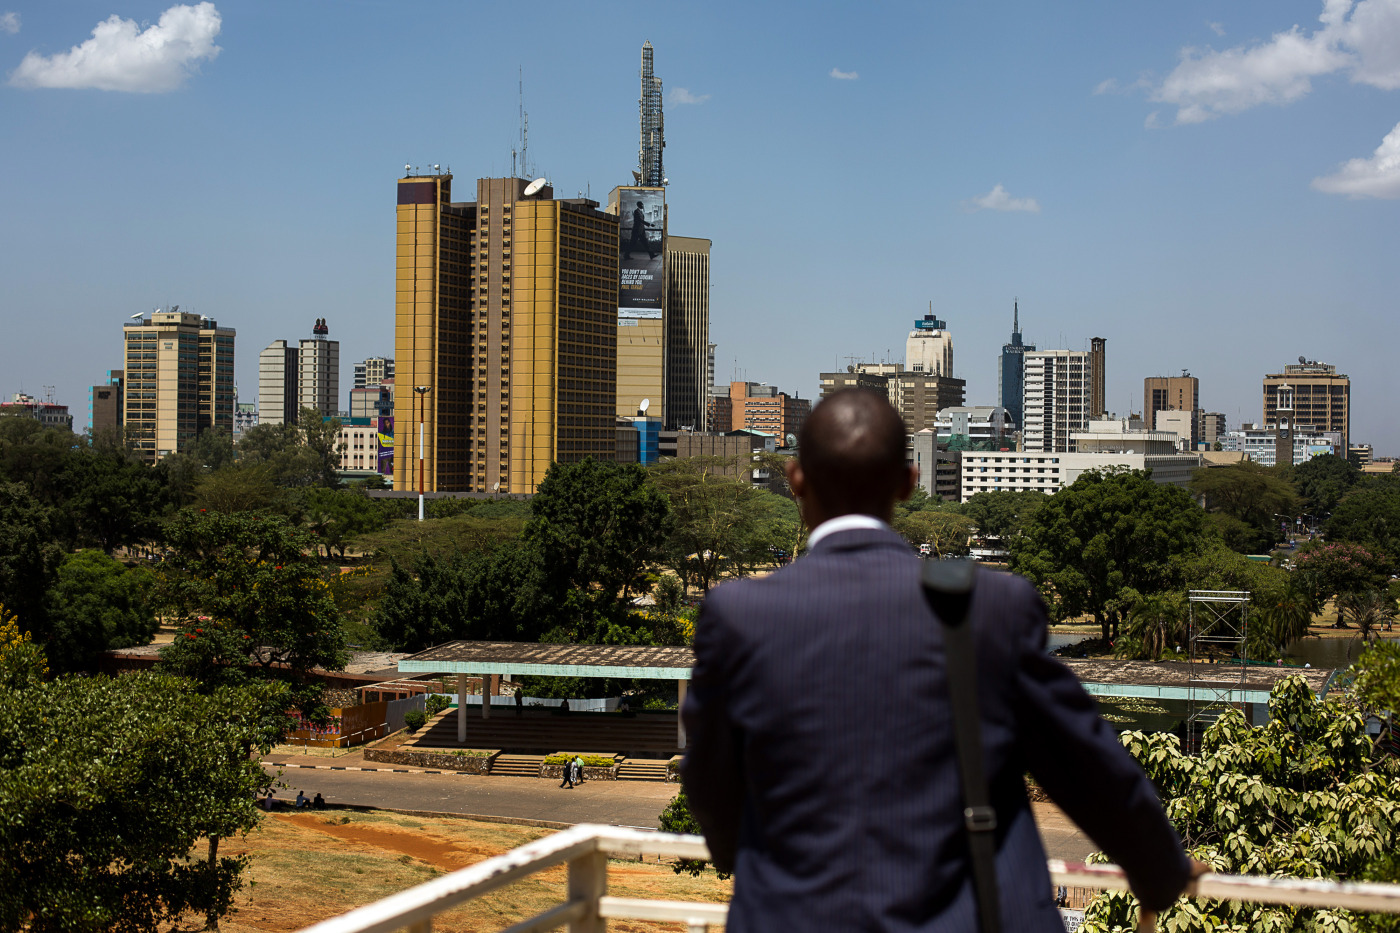 A man stands and looks out across the city skyline in Nairobi.